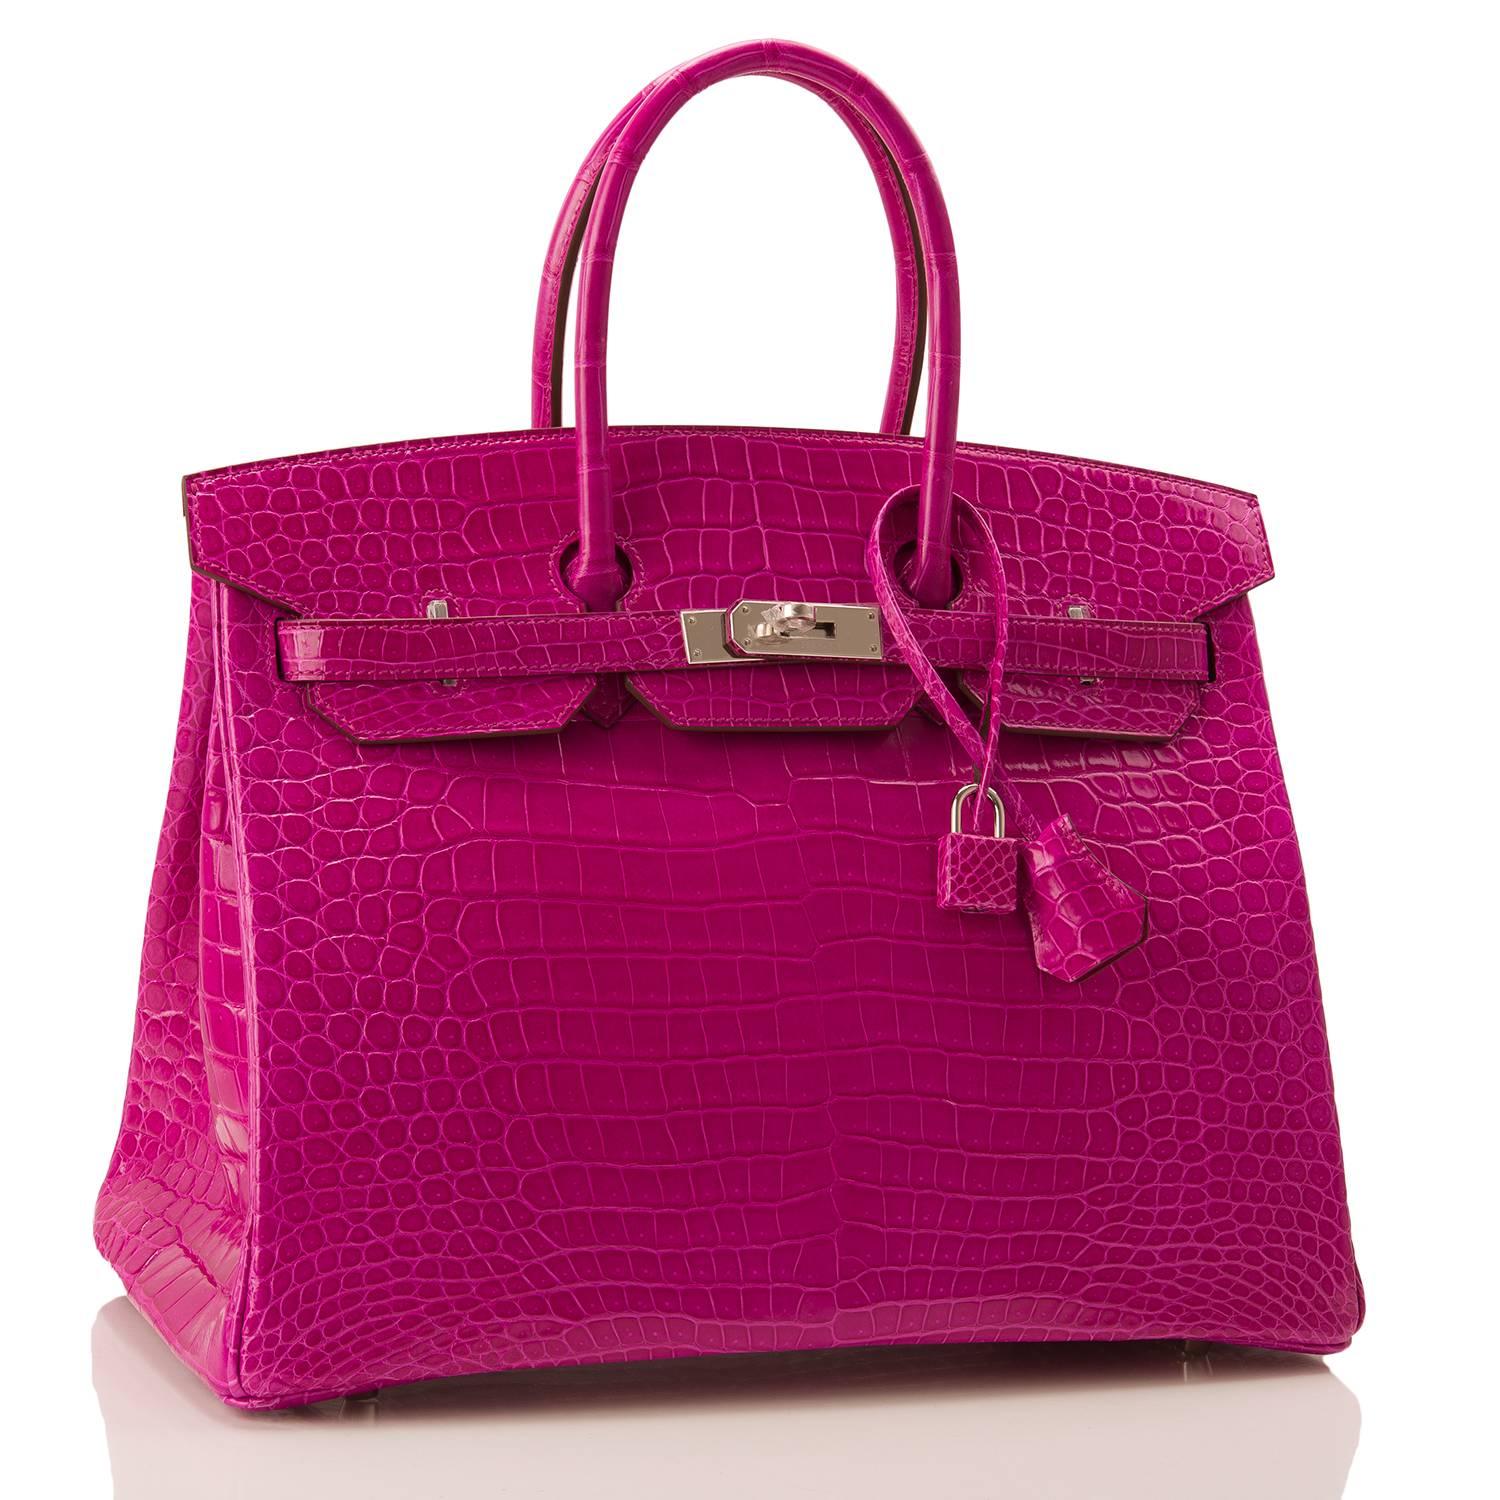 Hermes Rose Scheherazade Birkin 35cm in shiny porosus crocodile leather with palladium hardware.

This exotic Birkin features tonal stitching, front toggle closure, clochette with lock and two keys, and double rolled handles.

The interior is